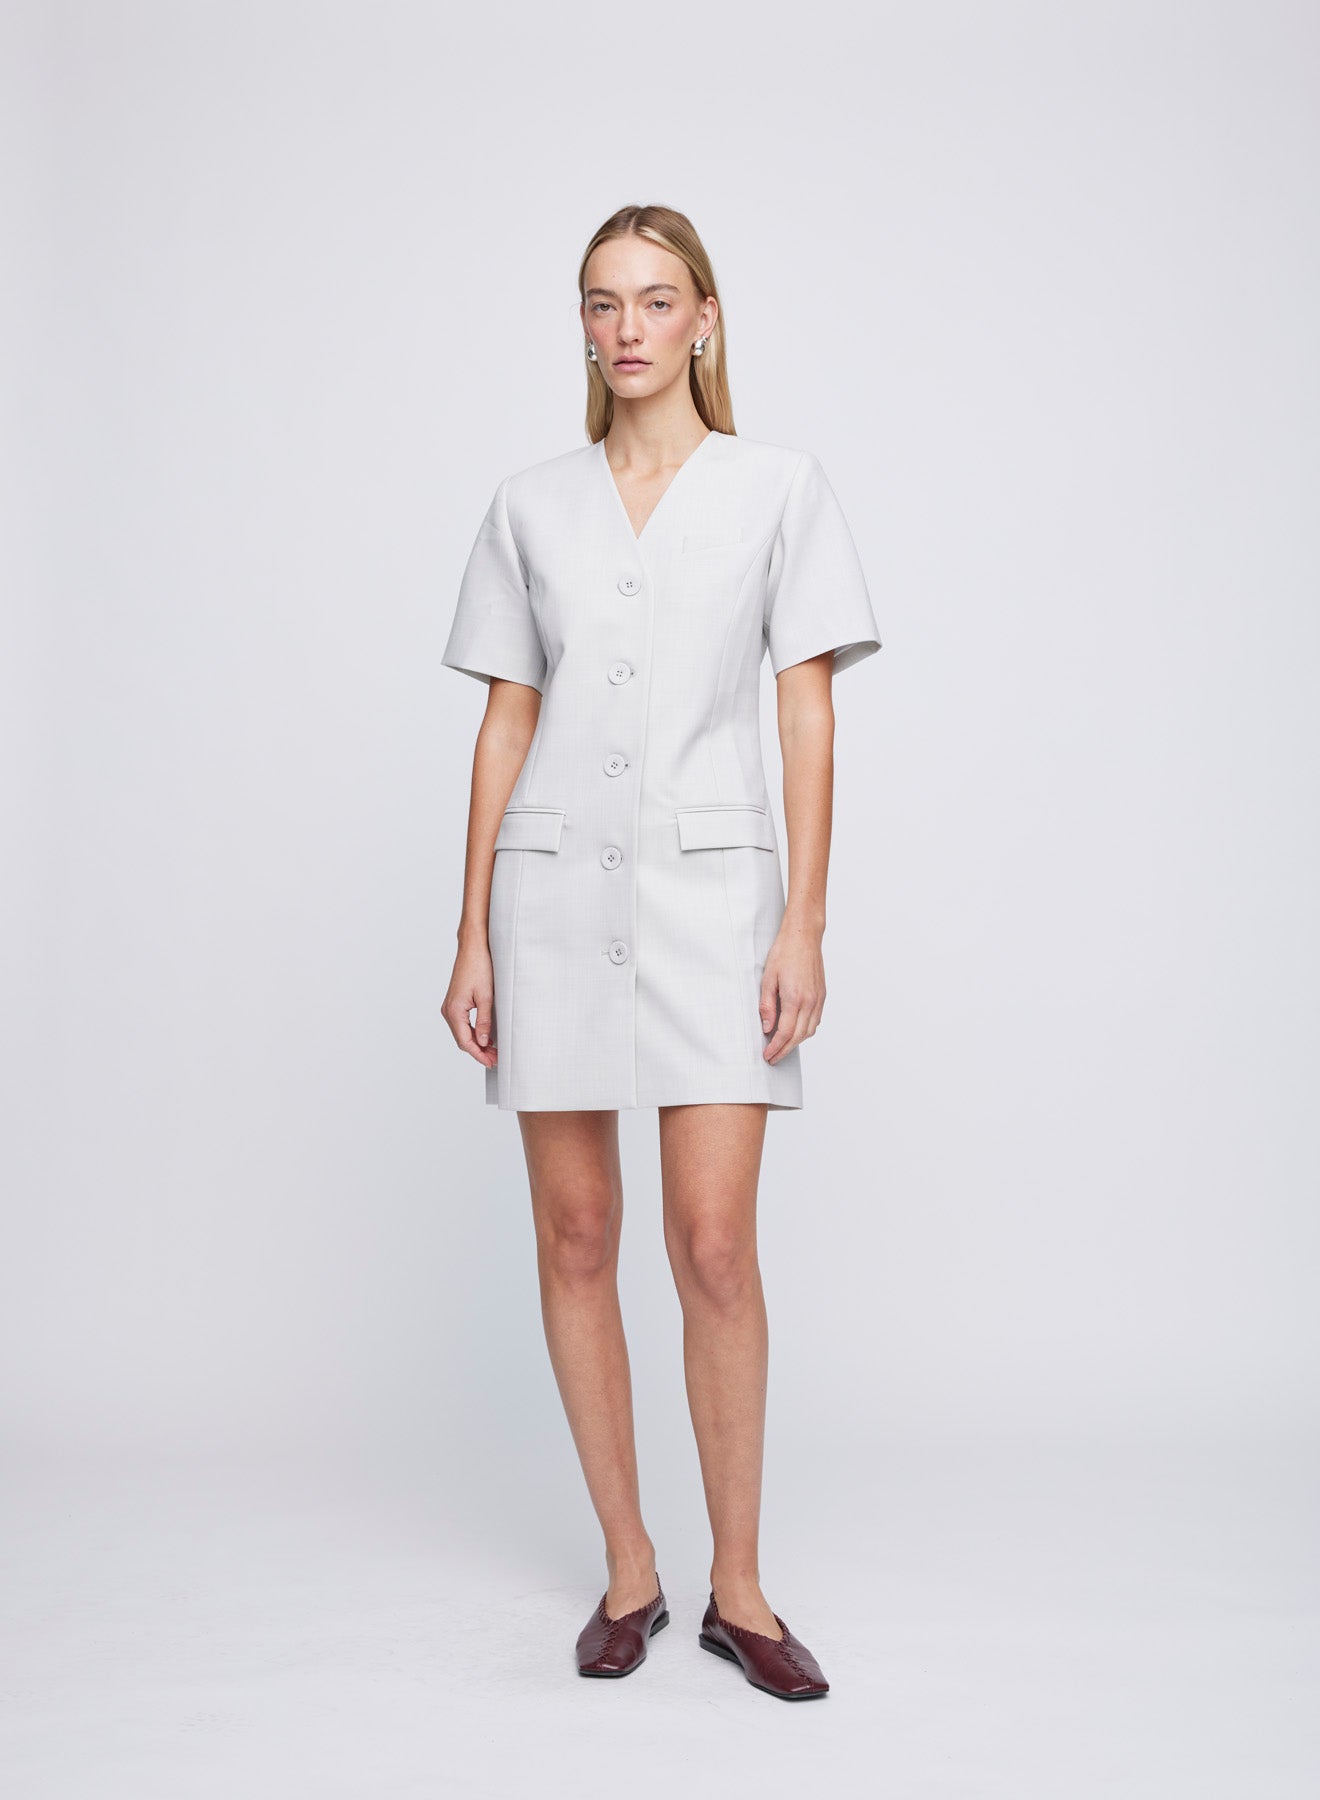 The ANNA QUAN Romy Dress features feminine seam work that shapes the waist line, a v cut neckline and flap pockets. Finishing touches include a button down front and A-line hem. Fully lined for ease of wear and crafted in heather wool suiting. 